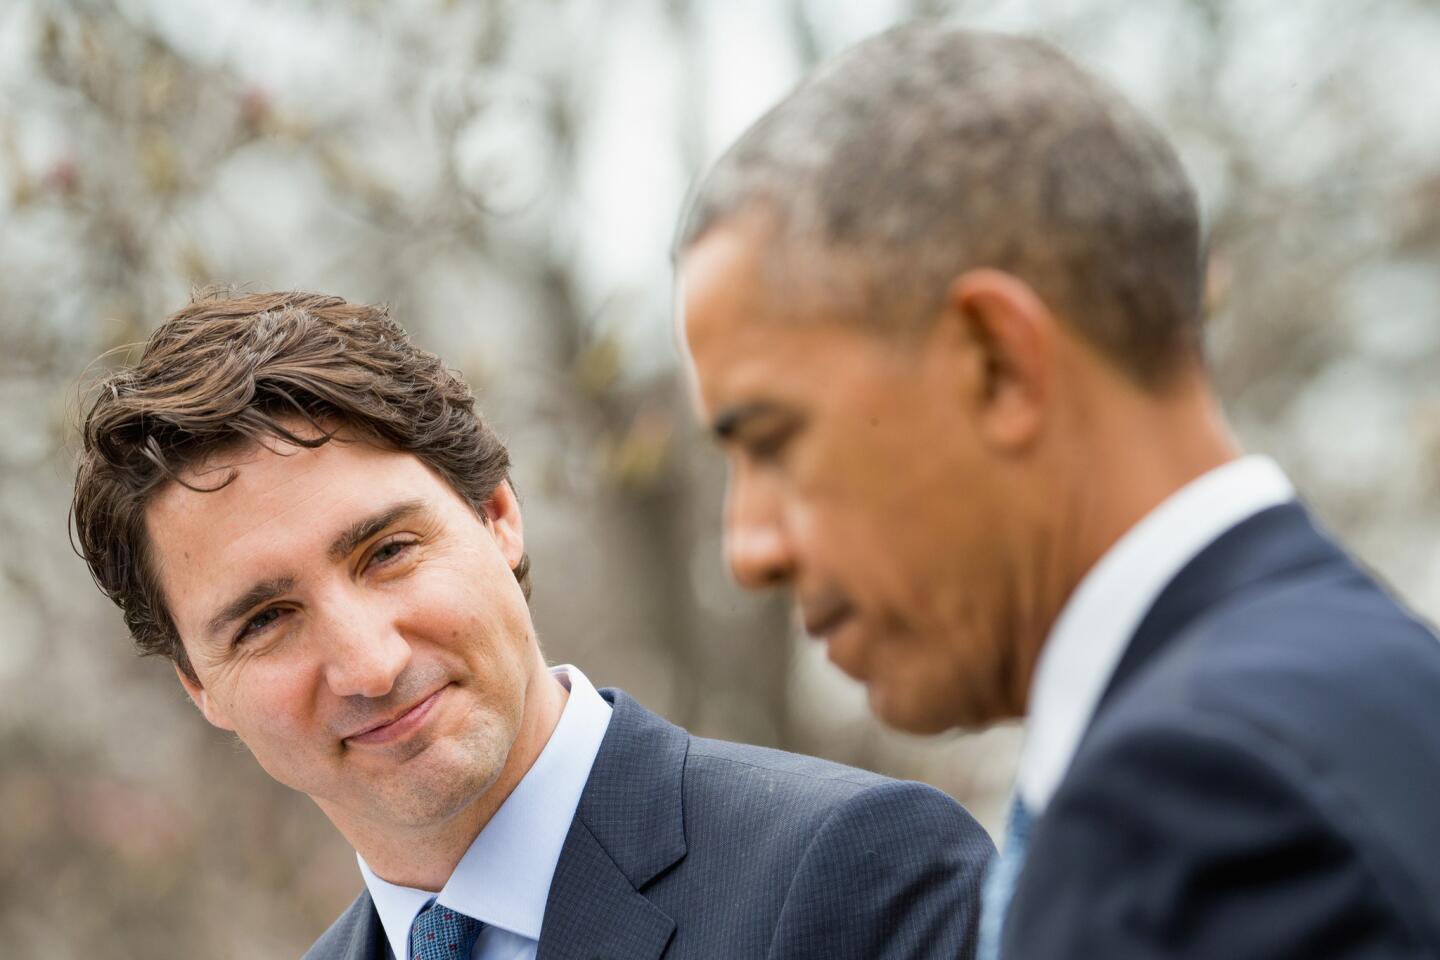 Canadian Prime Minister Justin Trudeau thanks President Barack Obama while speaking at a bilateral news conference in the White House's Rose Garden on March 10, 2016, in Washington.